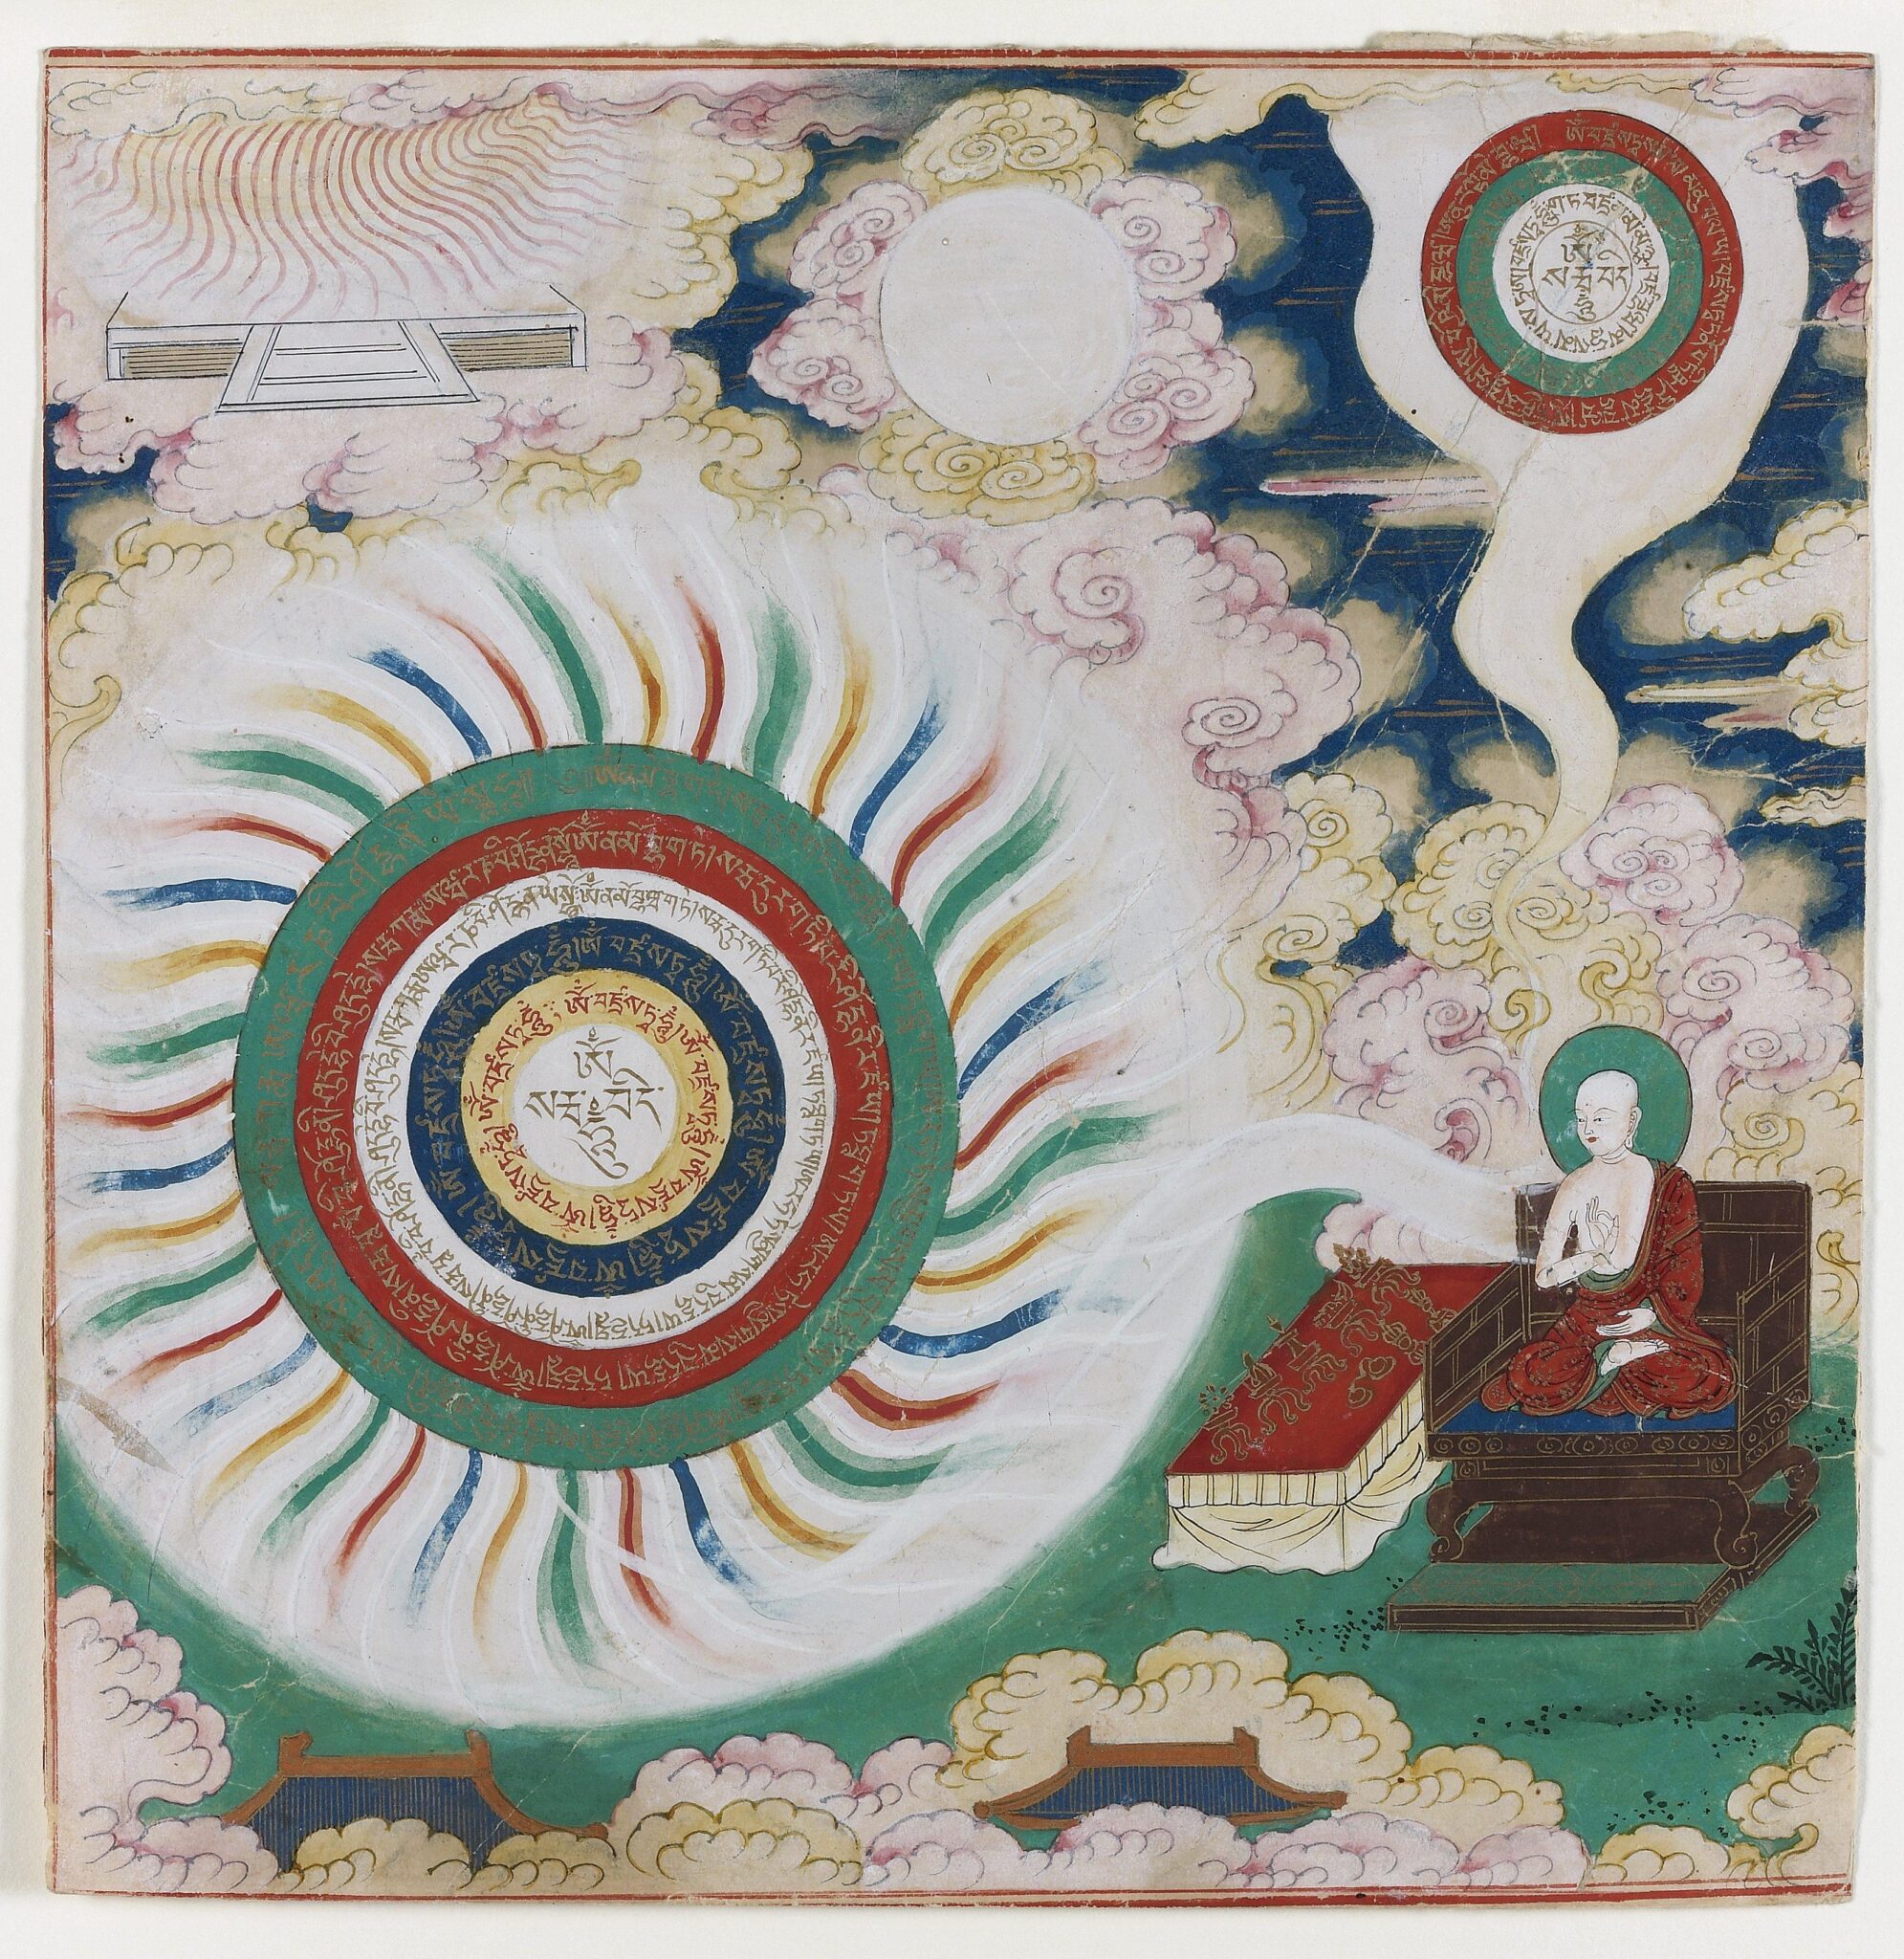 Disc composed of concentric circles with rainbow-colored outer fringe emanates from figure seated at bottom right